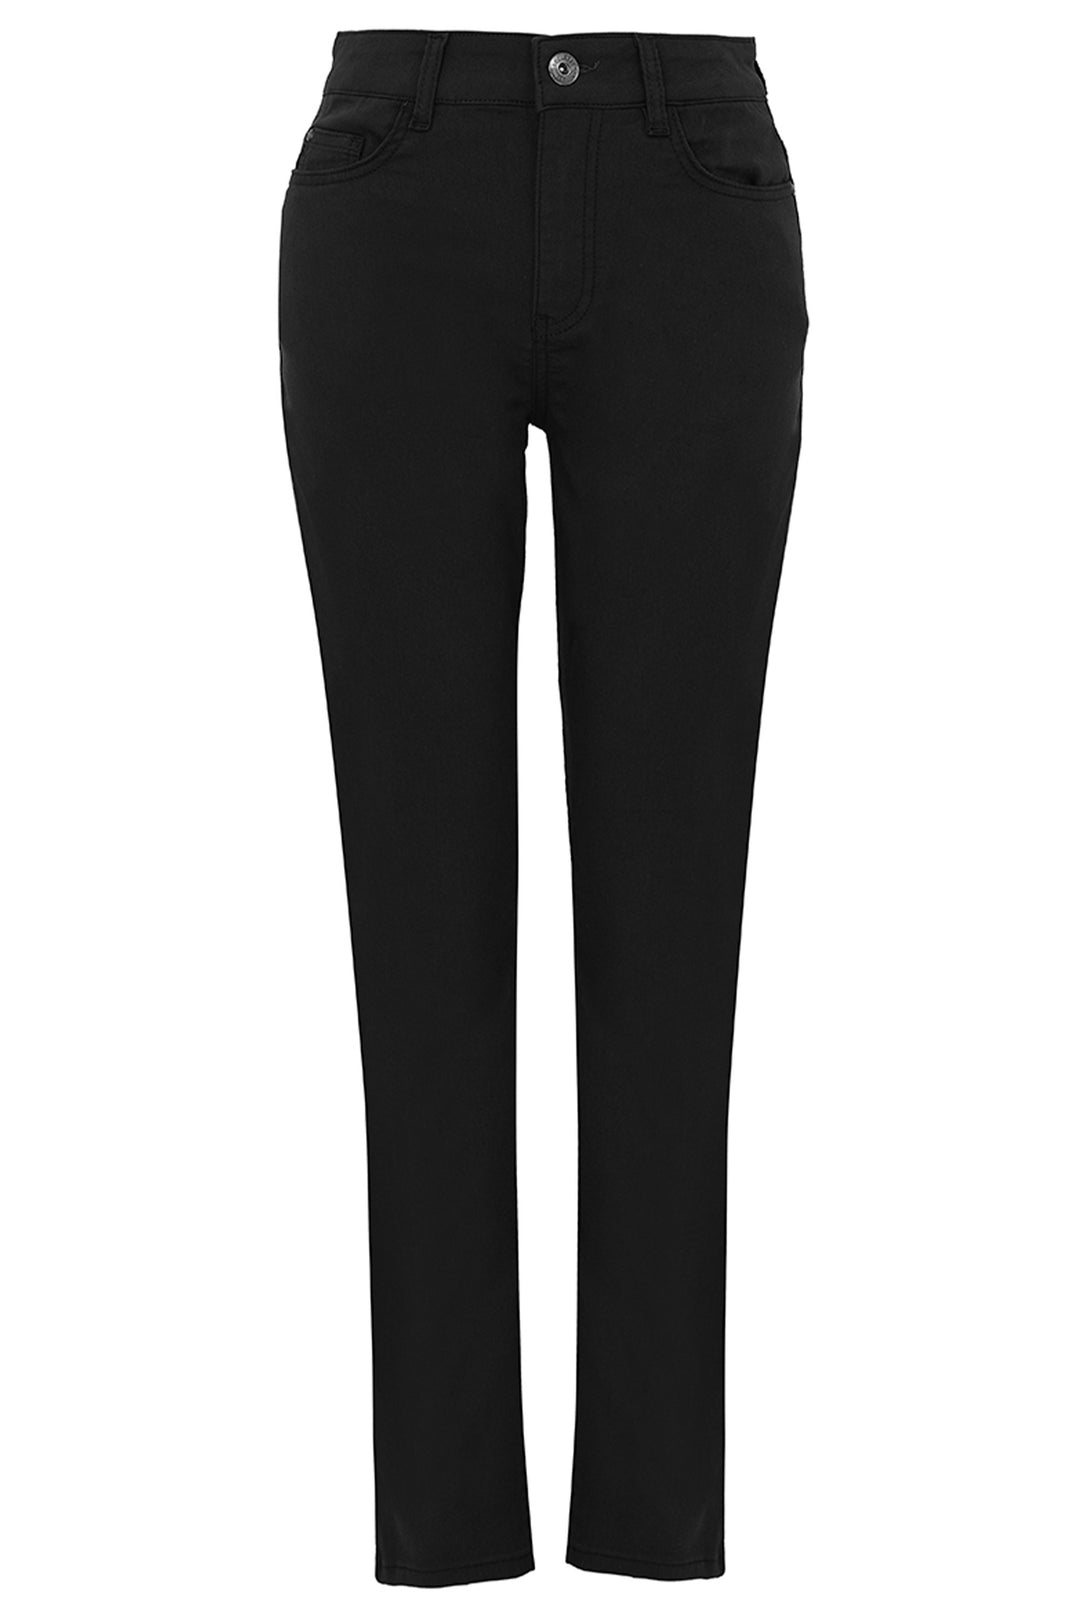 A timeless classic with a modern twist, our Slim Pant has a flattering fit and comfortable stretch fabric.